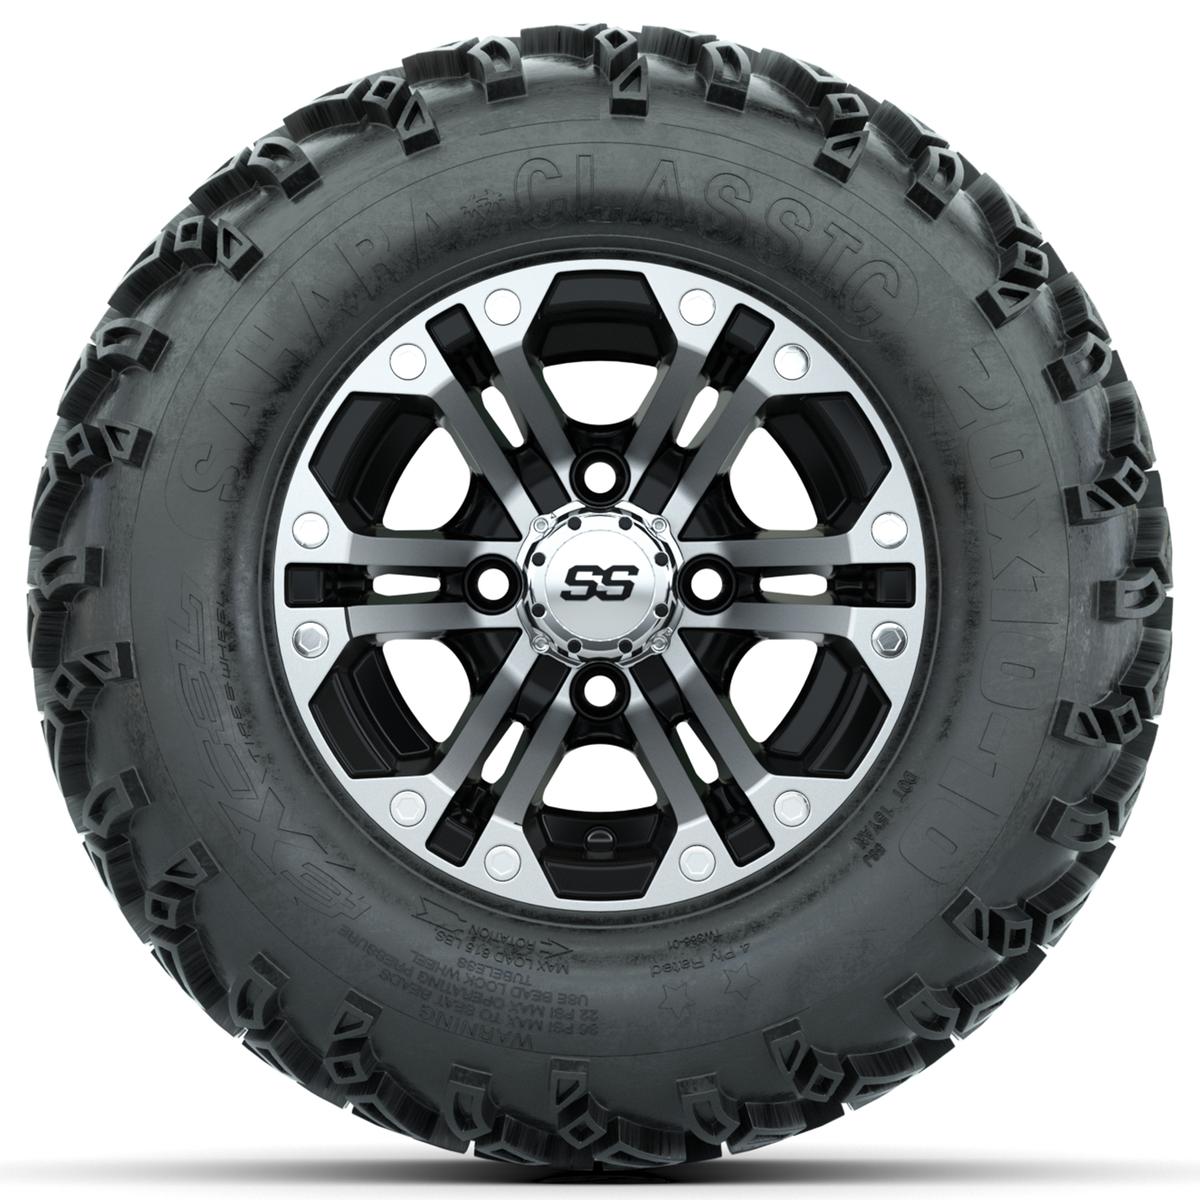 Set of (4) 10 in GTW Specter Wheels with 20x10-10 Sahara Classic All Terrain Tires